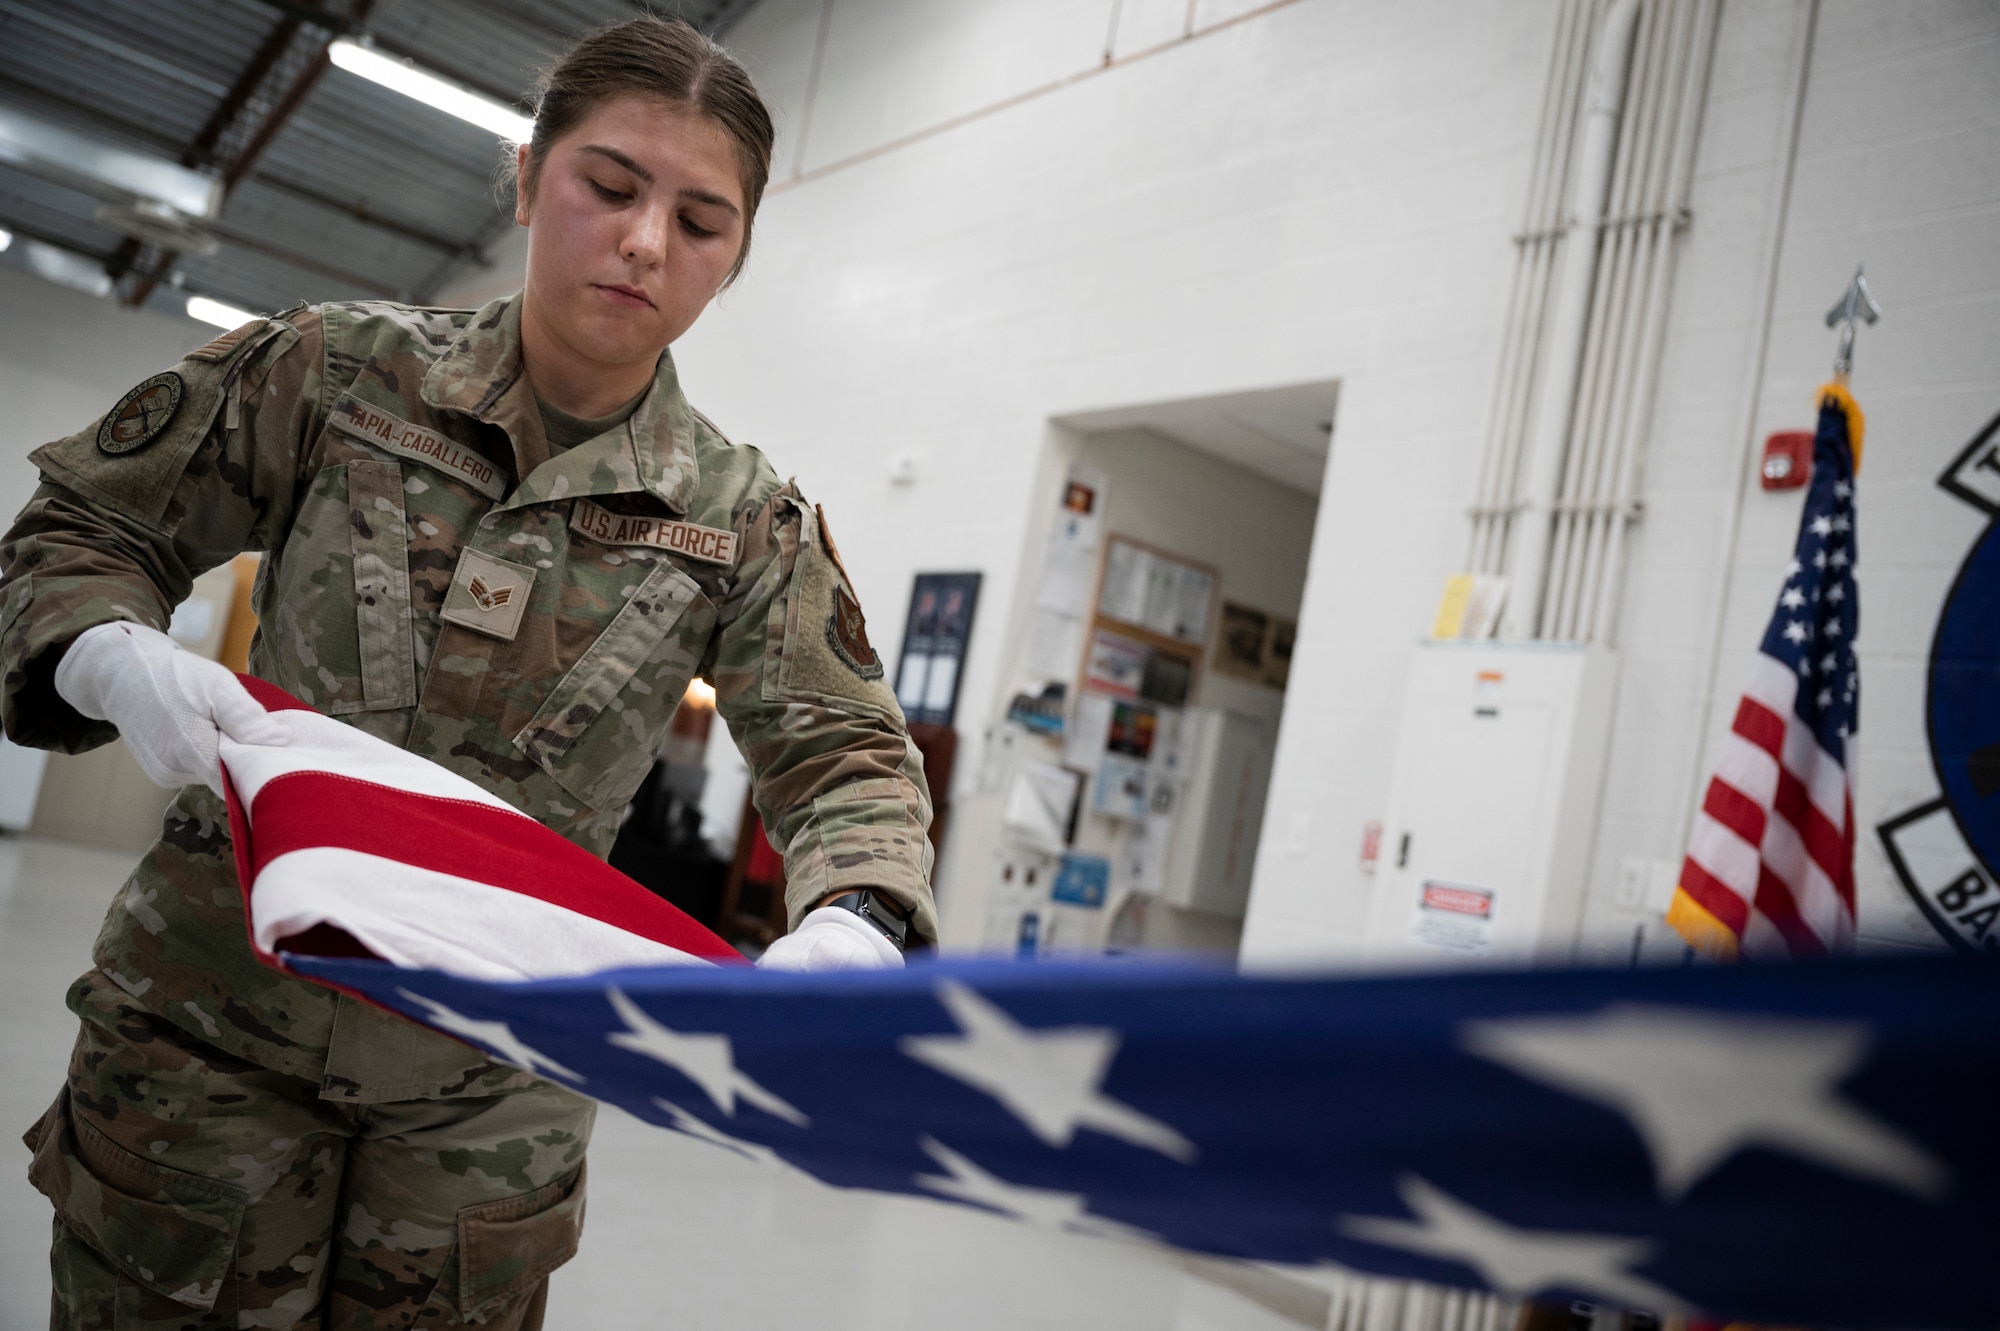 A woman in military uniform is shown folding a U.S. flag.